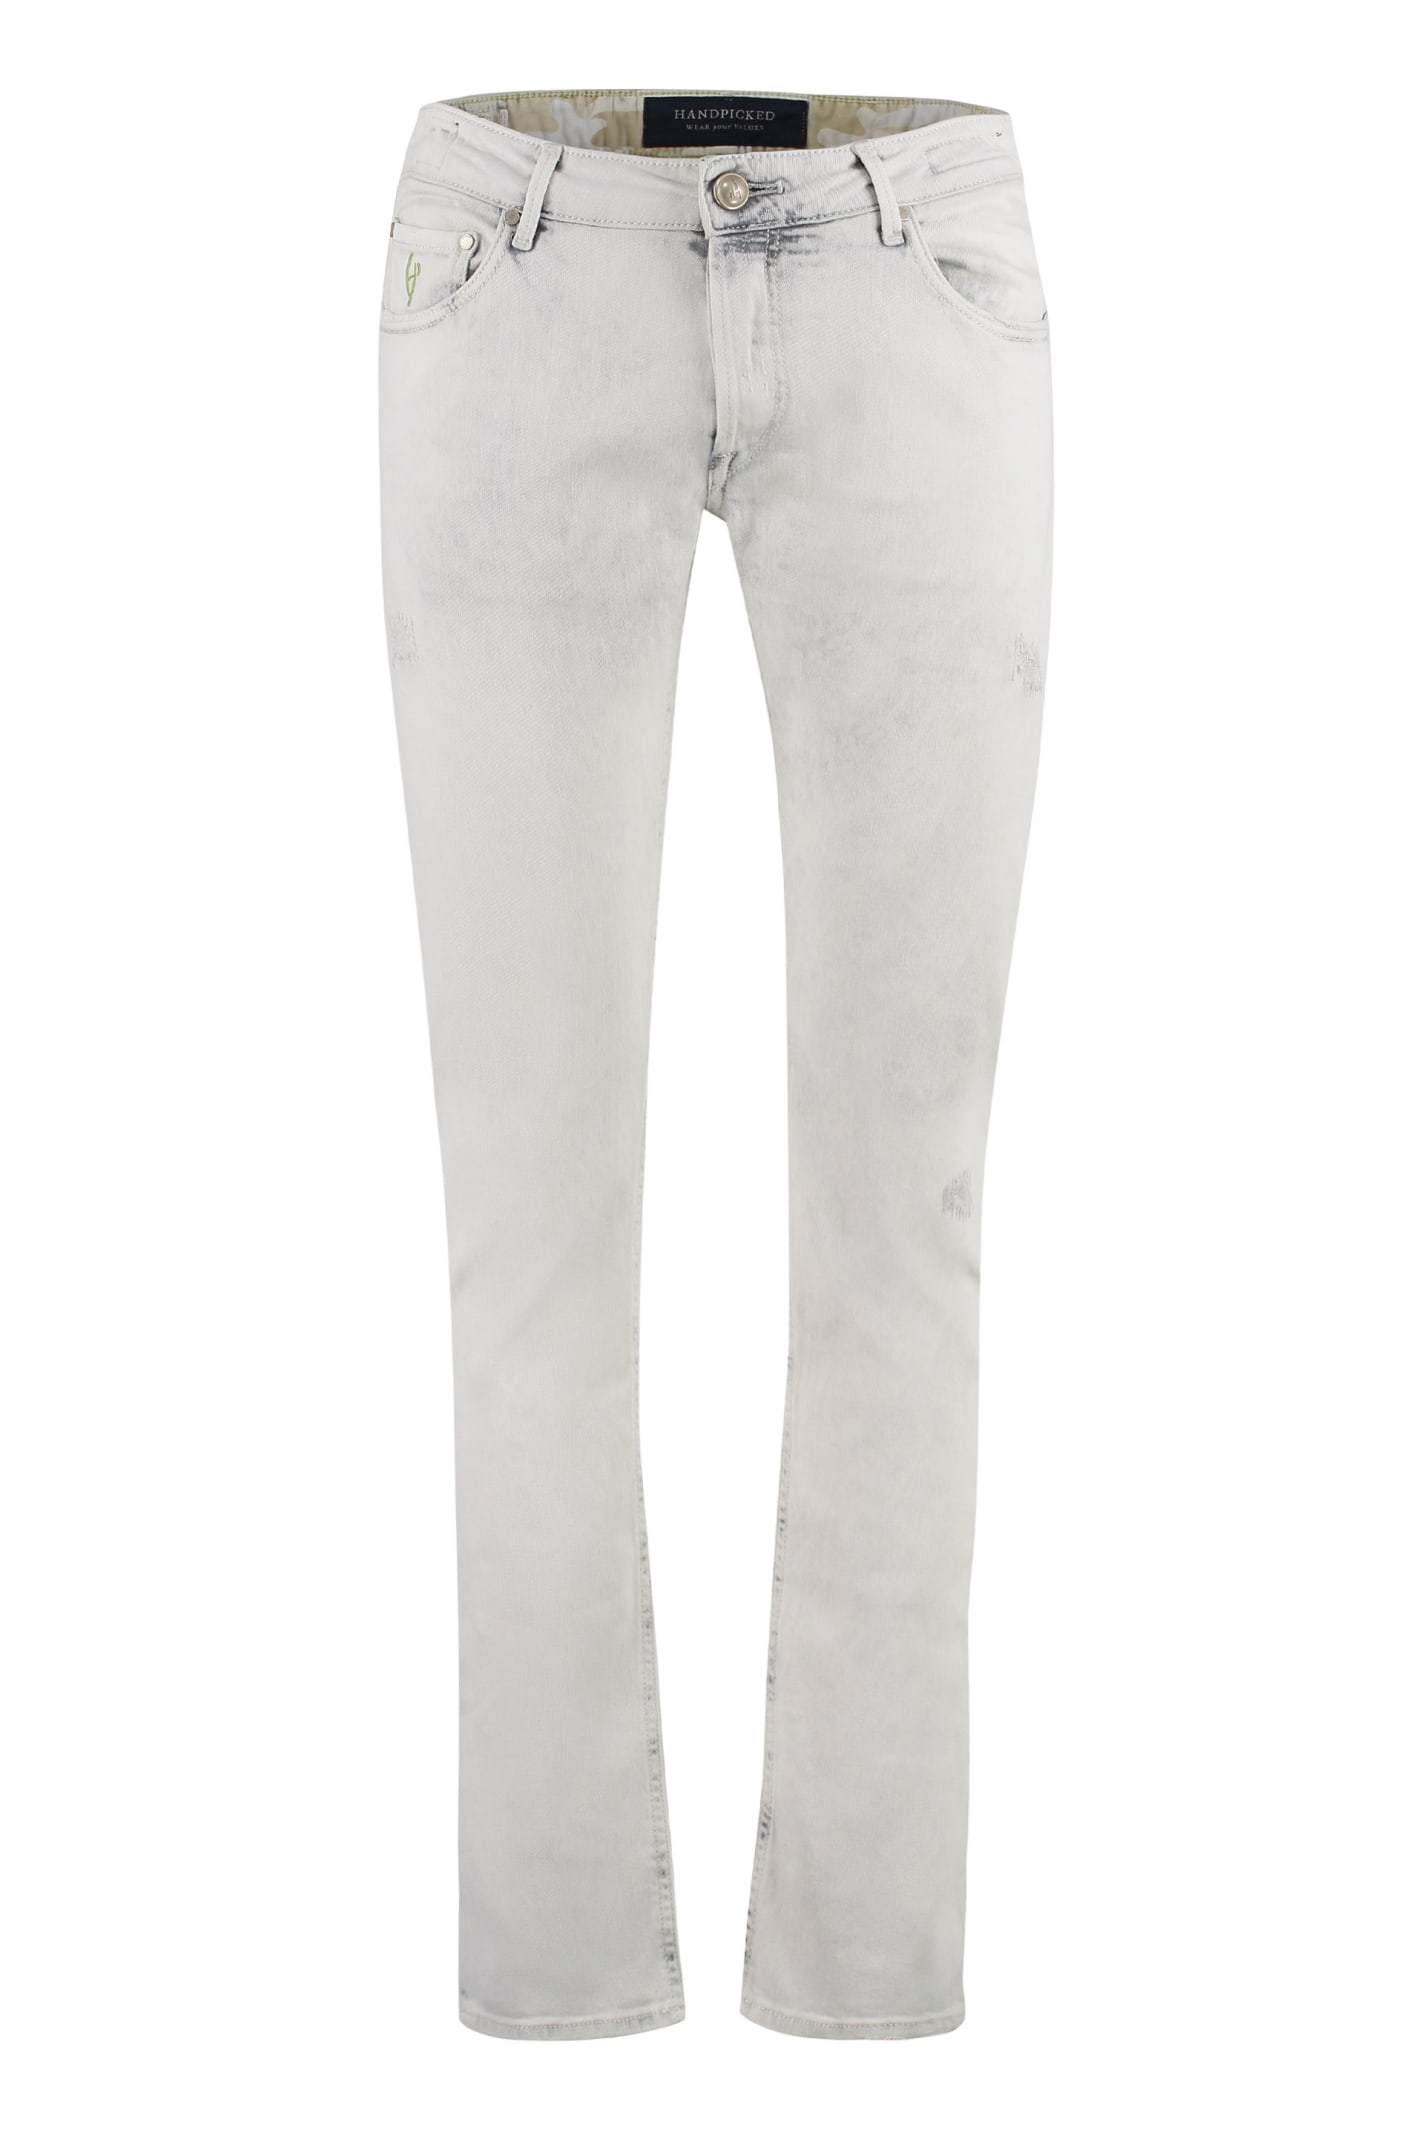 Shop Hand Picked Orvieto Slim Fit Jeans In Grey